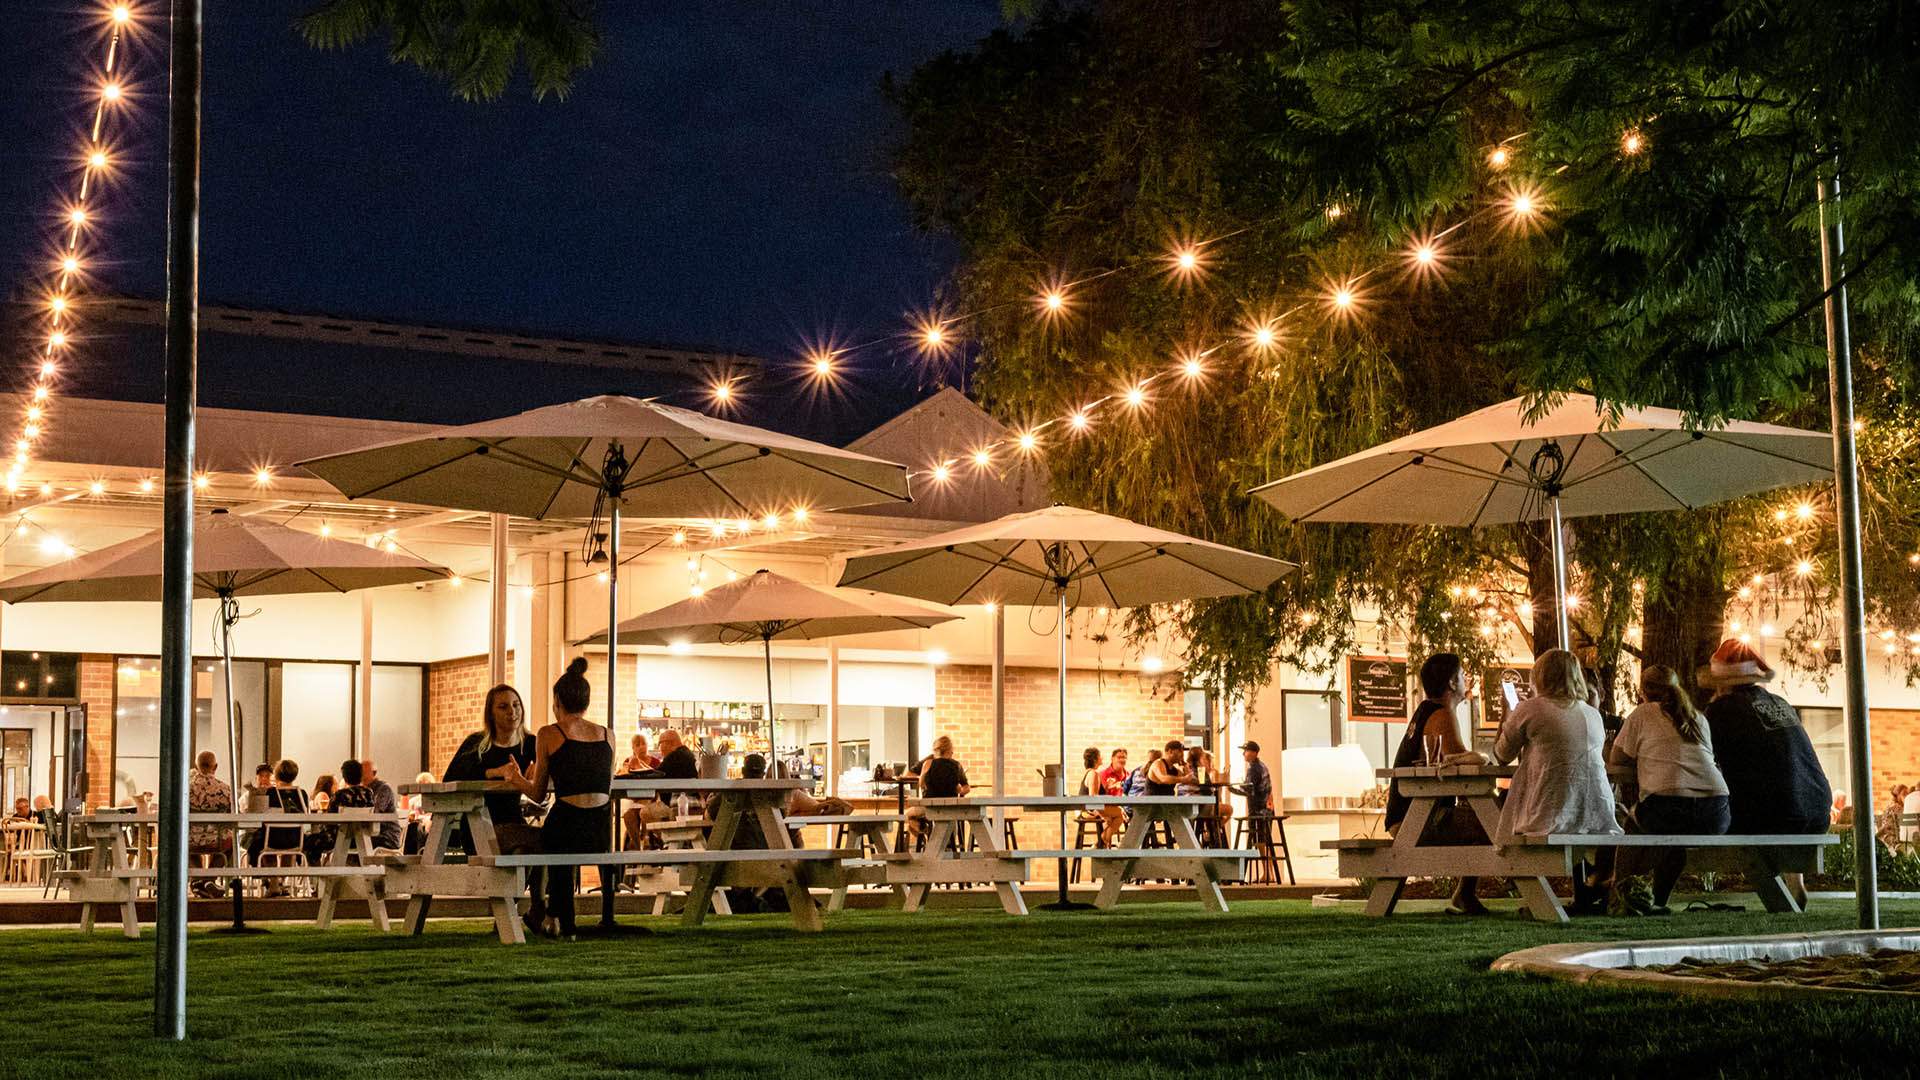 Bribie Island Hotel Has Reopened with a Big Fairy Light-Lit Beer Garden After a $2.2 Million Revamp